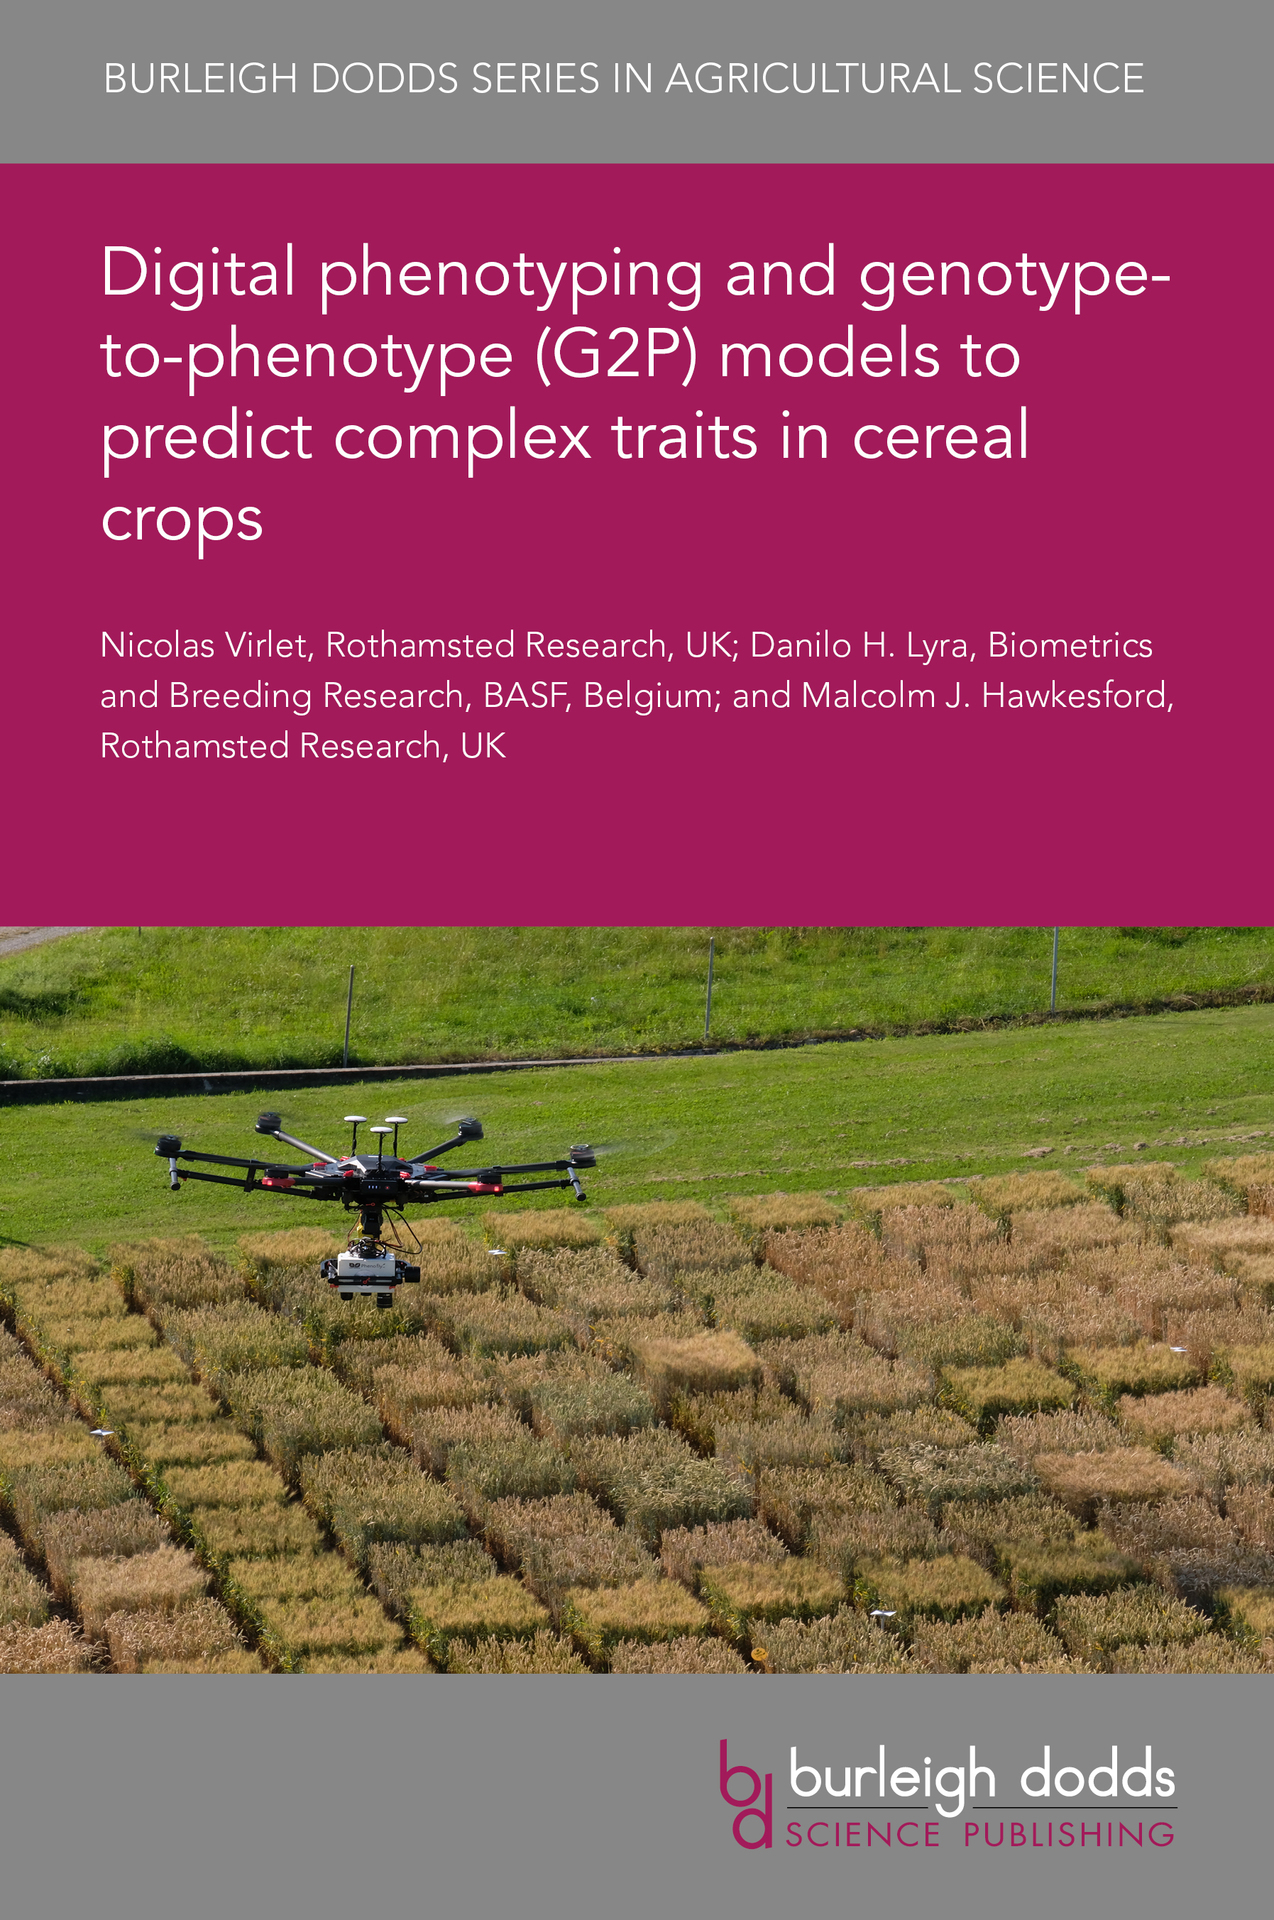 Digital phenotyping and genotype-to- phenotype (G2P) models to predict complex traits in cereal crops